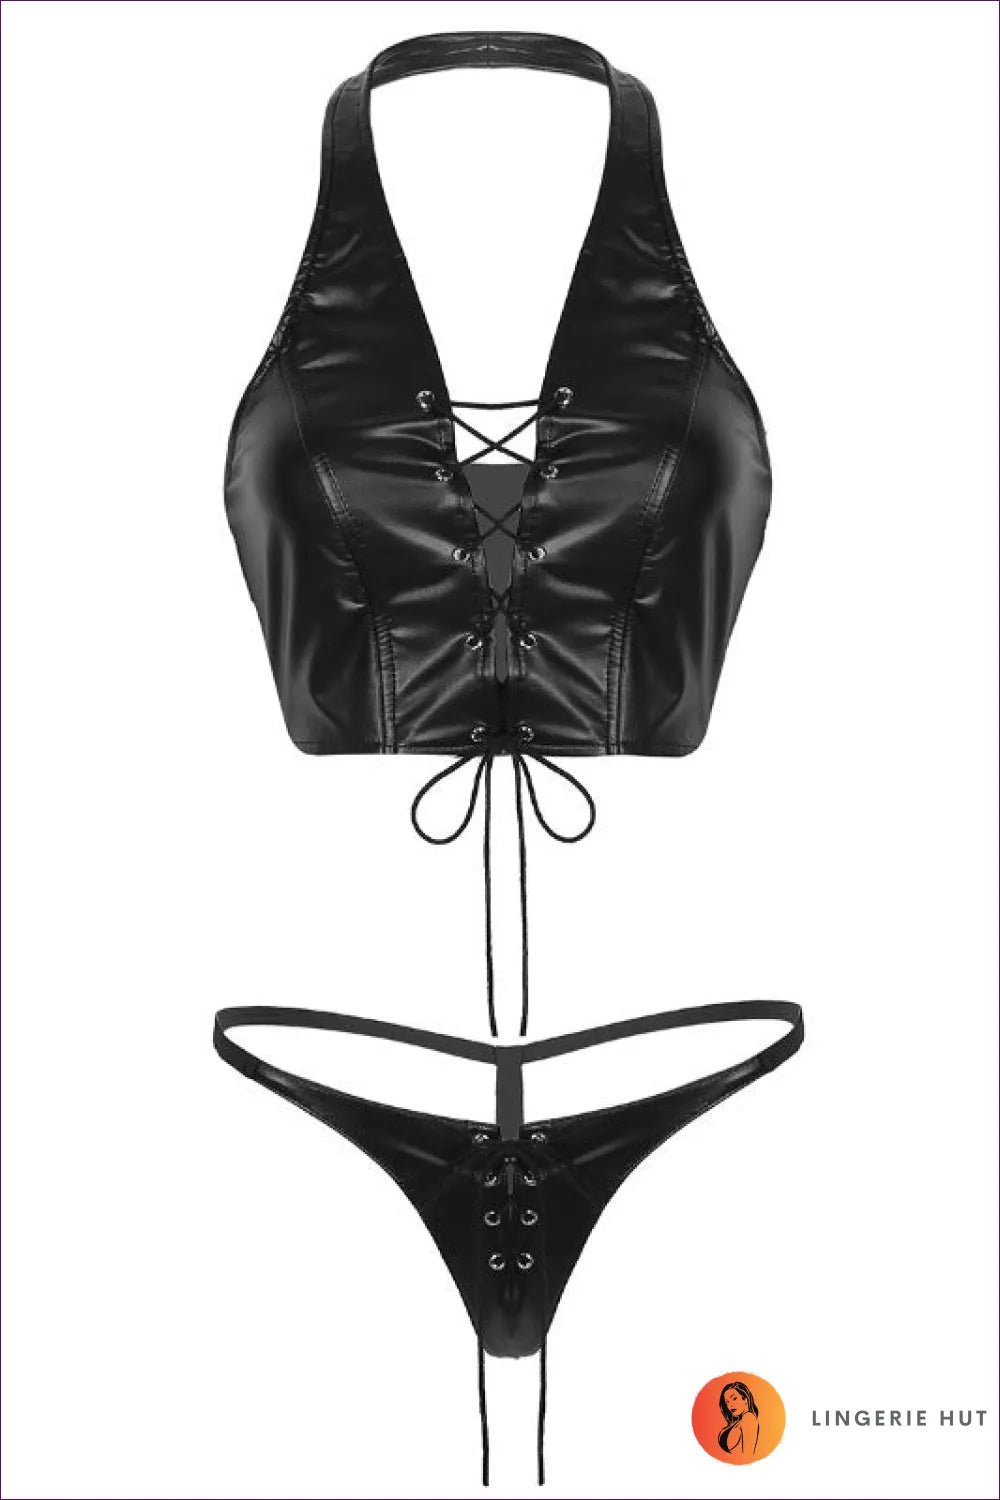 Embrace Your Fearless Side With Lingerie Hut’s Patent Leather Lace-up Halter Bra Set. a Glossy, Split